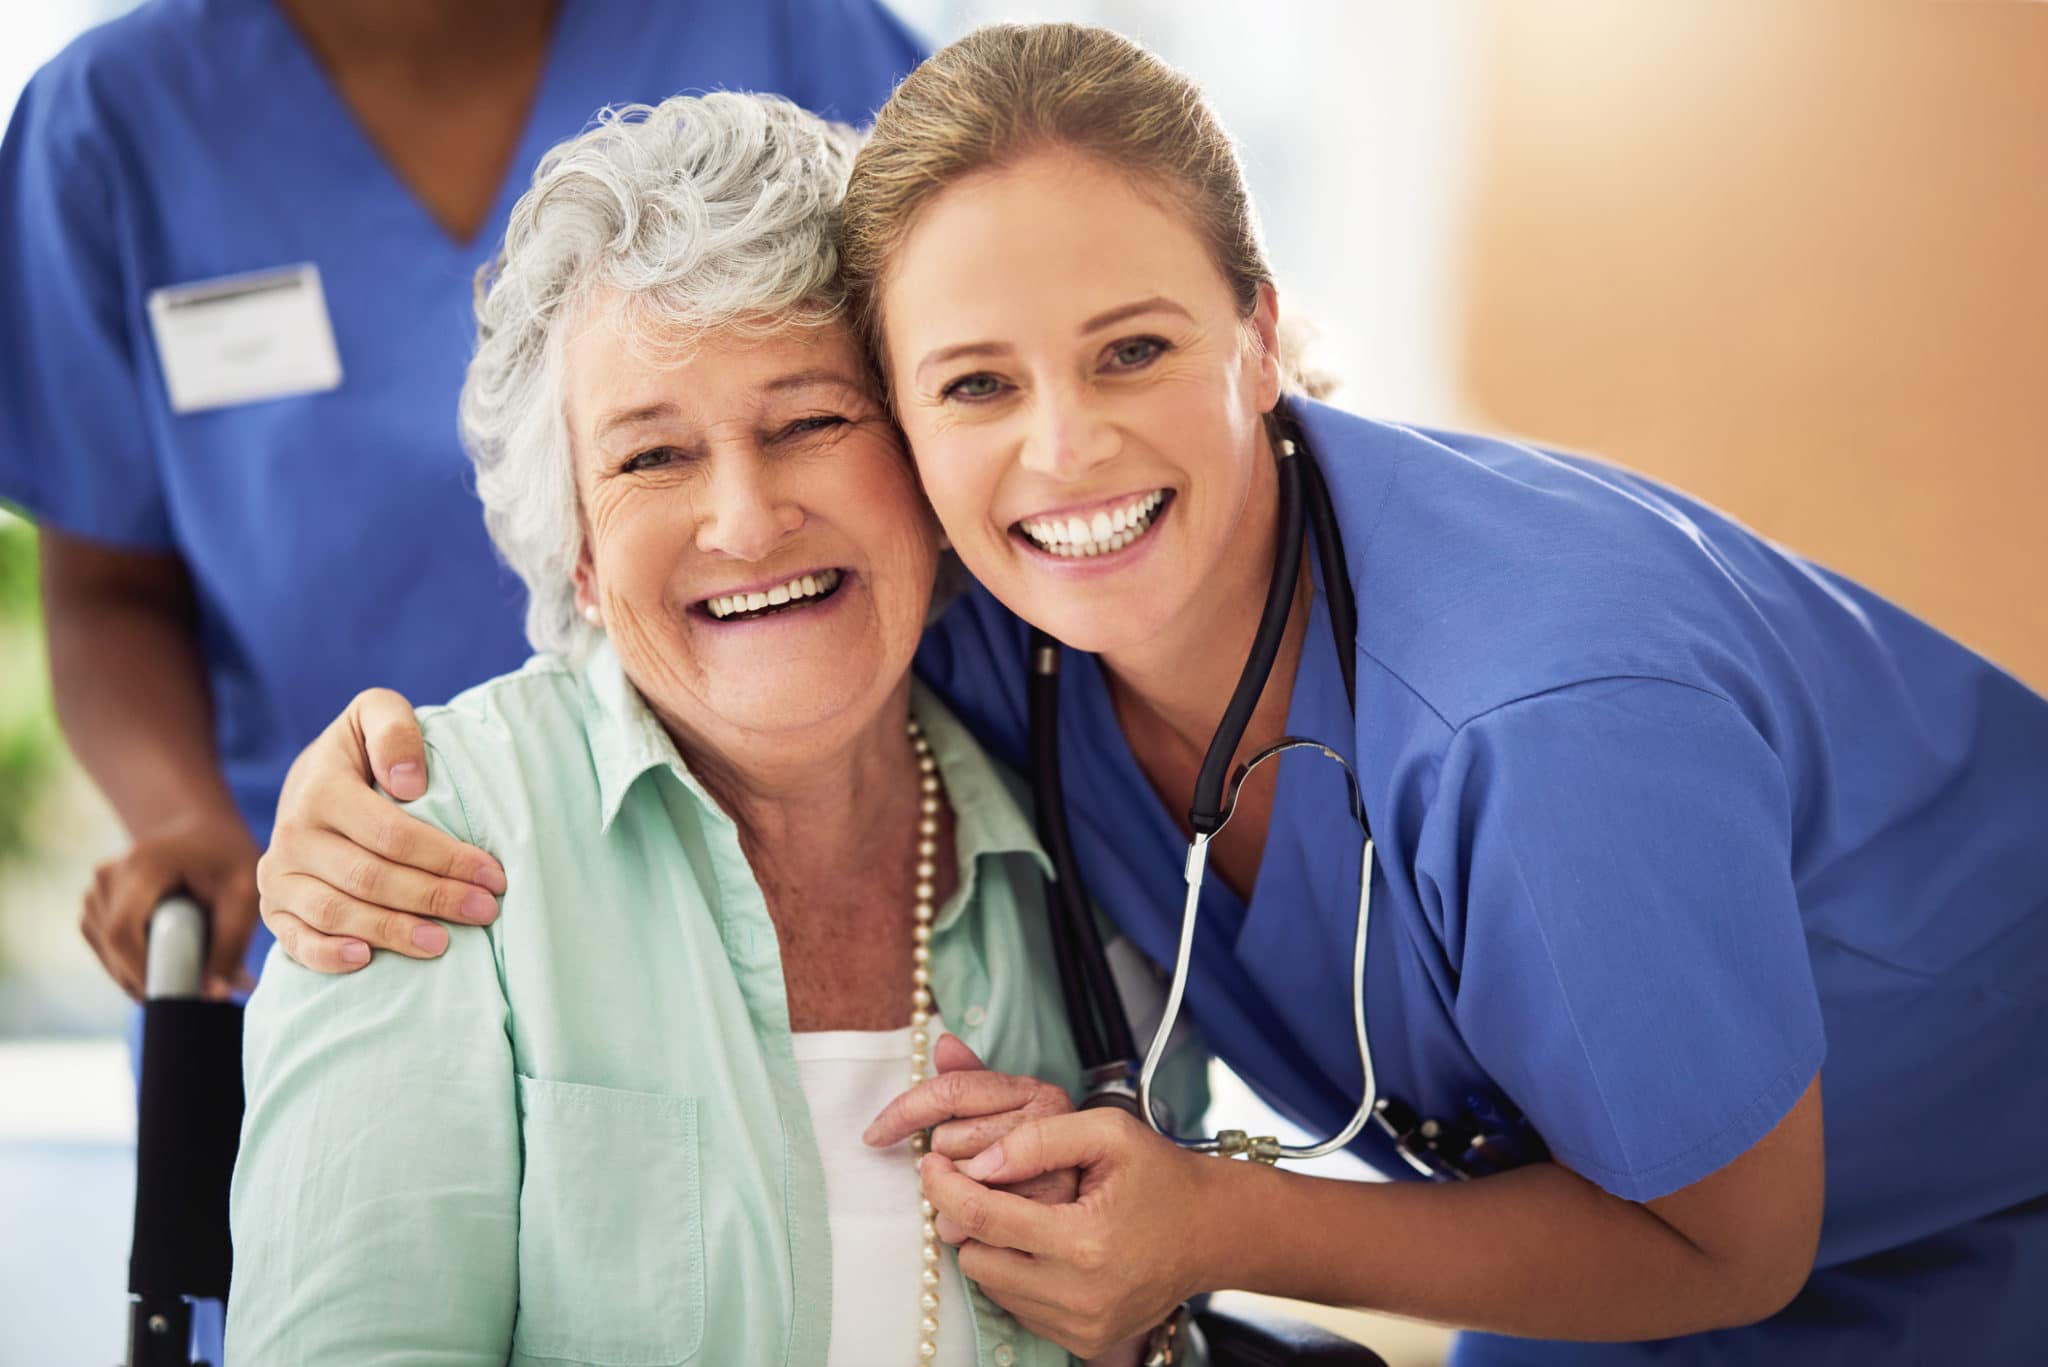 Portrait of a smiling nurse with her senior patient in a hospital